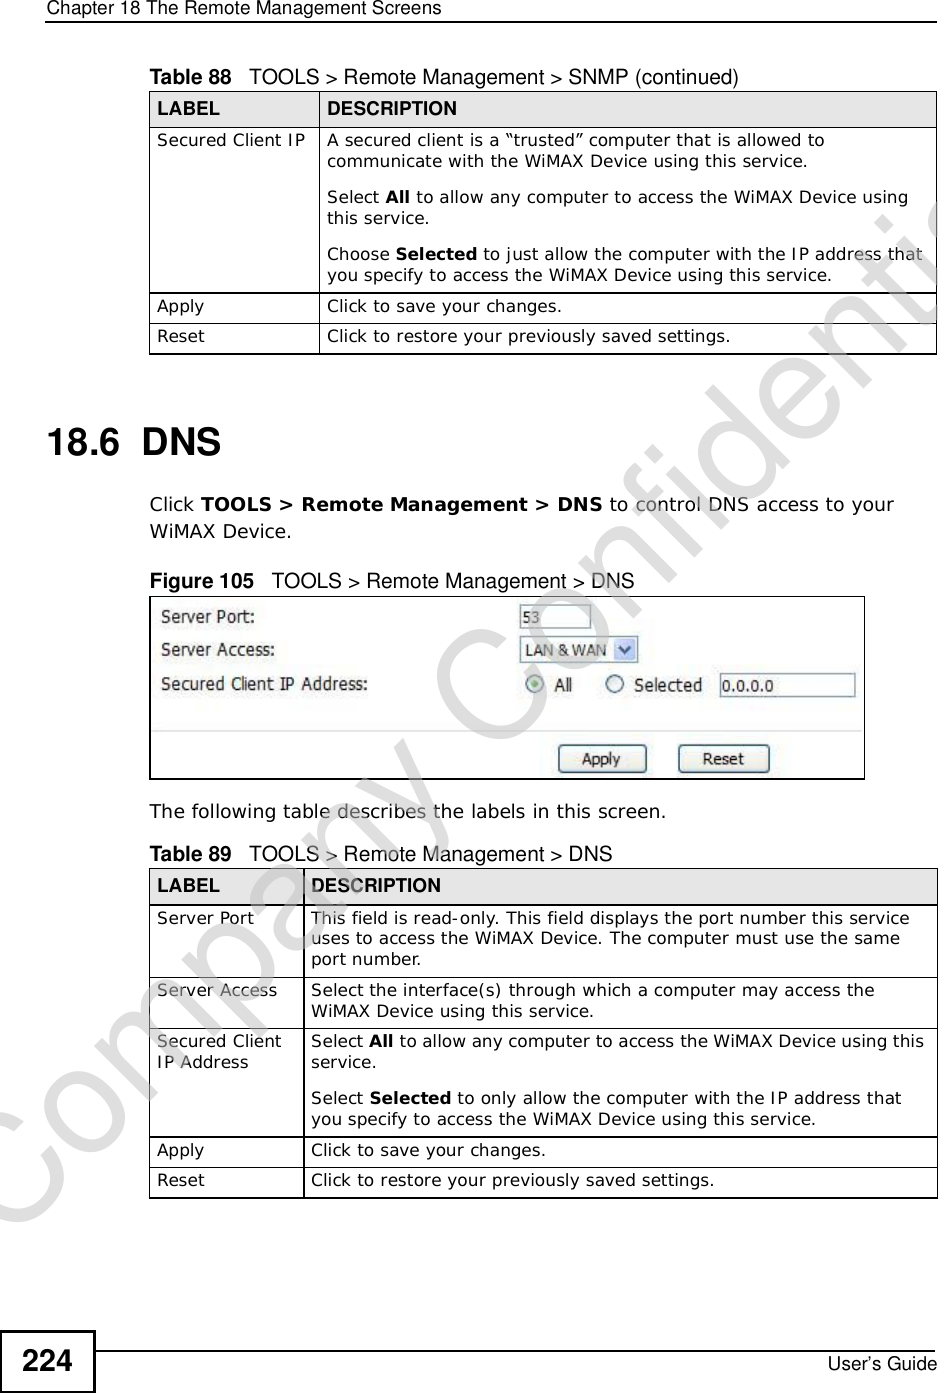 Chapter 18The Remote Management ScreensUser’s Guide22418.6  DNSClick TOOLS &gt; Remote Management &gt; DNS to control DNS access to your WiMAX Device.Figure 105   TOOLS &gt; Remote Management &gt; DNSThe following table describes the labels in this screen.Secured Client IP A secured client is a “trusted” computer that is allowed to communicate with the WiMAX Device using this service. Select All to allow any computer to access the WiMAX Device using this service.Choose Selected to just allow the computer with the IP address that you specify to access the WiMAX Device using this service.Apply Click to save your changes.Reset Click to restore your previously saved settings.Table 88   TOOLS &gt; Remote Management &gt; SNMP (continued)LABEL DESCRIPTIONTable 89   TOOLS &gt; Remote Management &gt; DNSLABEL DESCRIPTIONServer Port This field is read-only. This field displays the port number this service uses to access the WiMAX Device. The computer must use the same port number.Server Access Select the interface(s) through which a computer may access the WiMAX Device using this service.Secured Client IP Address Select All to allow any computer to access the WiMAX Device using this service.Select Selected to only allow the computer with the IP address that you specify to access the WiMAX Device using this service.Apply Click to save your changes.Reset Click to restore your previously saved settings.Company Confidential